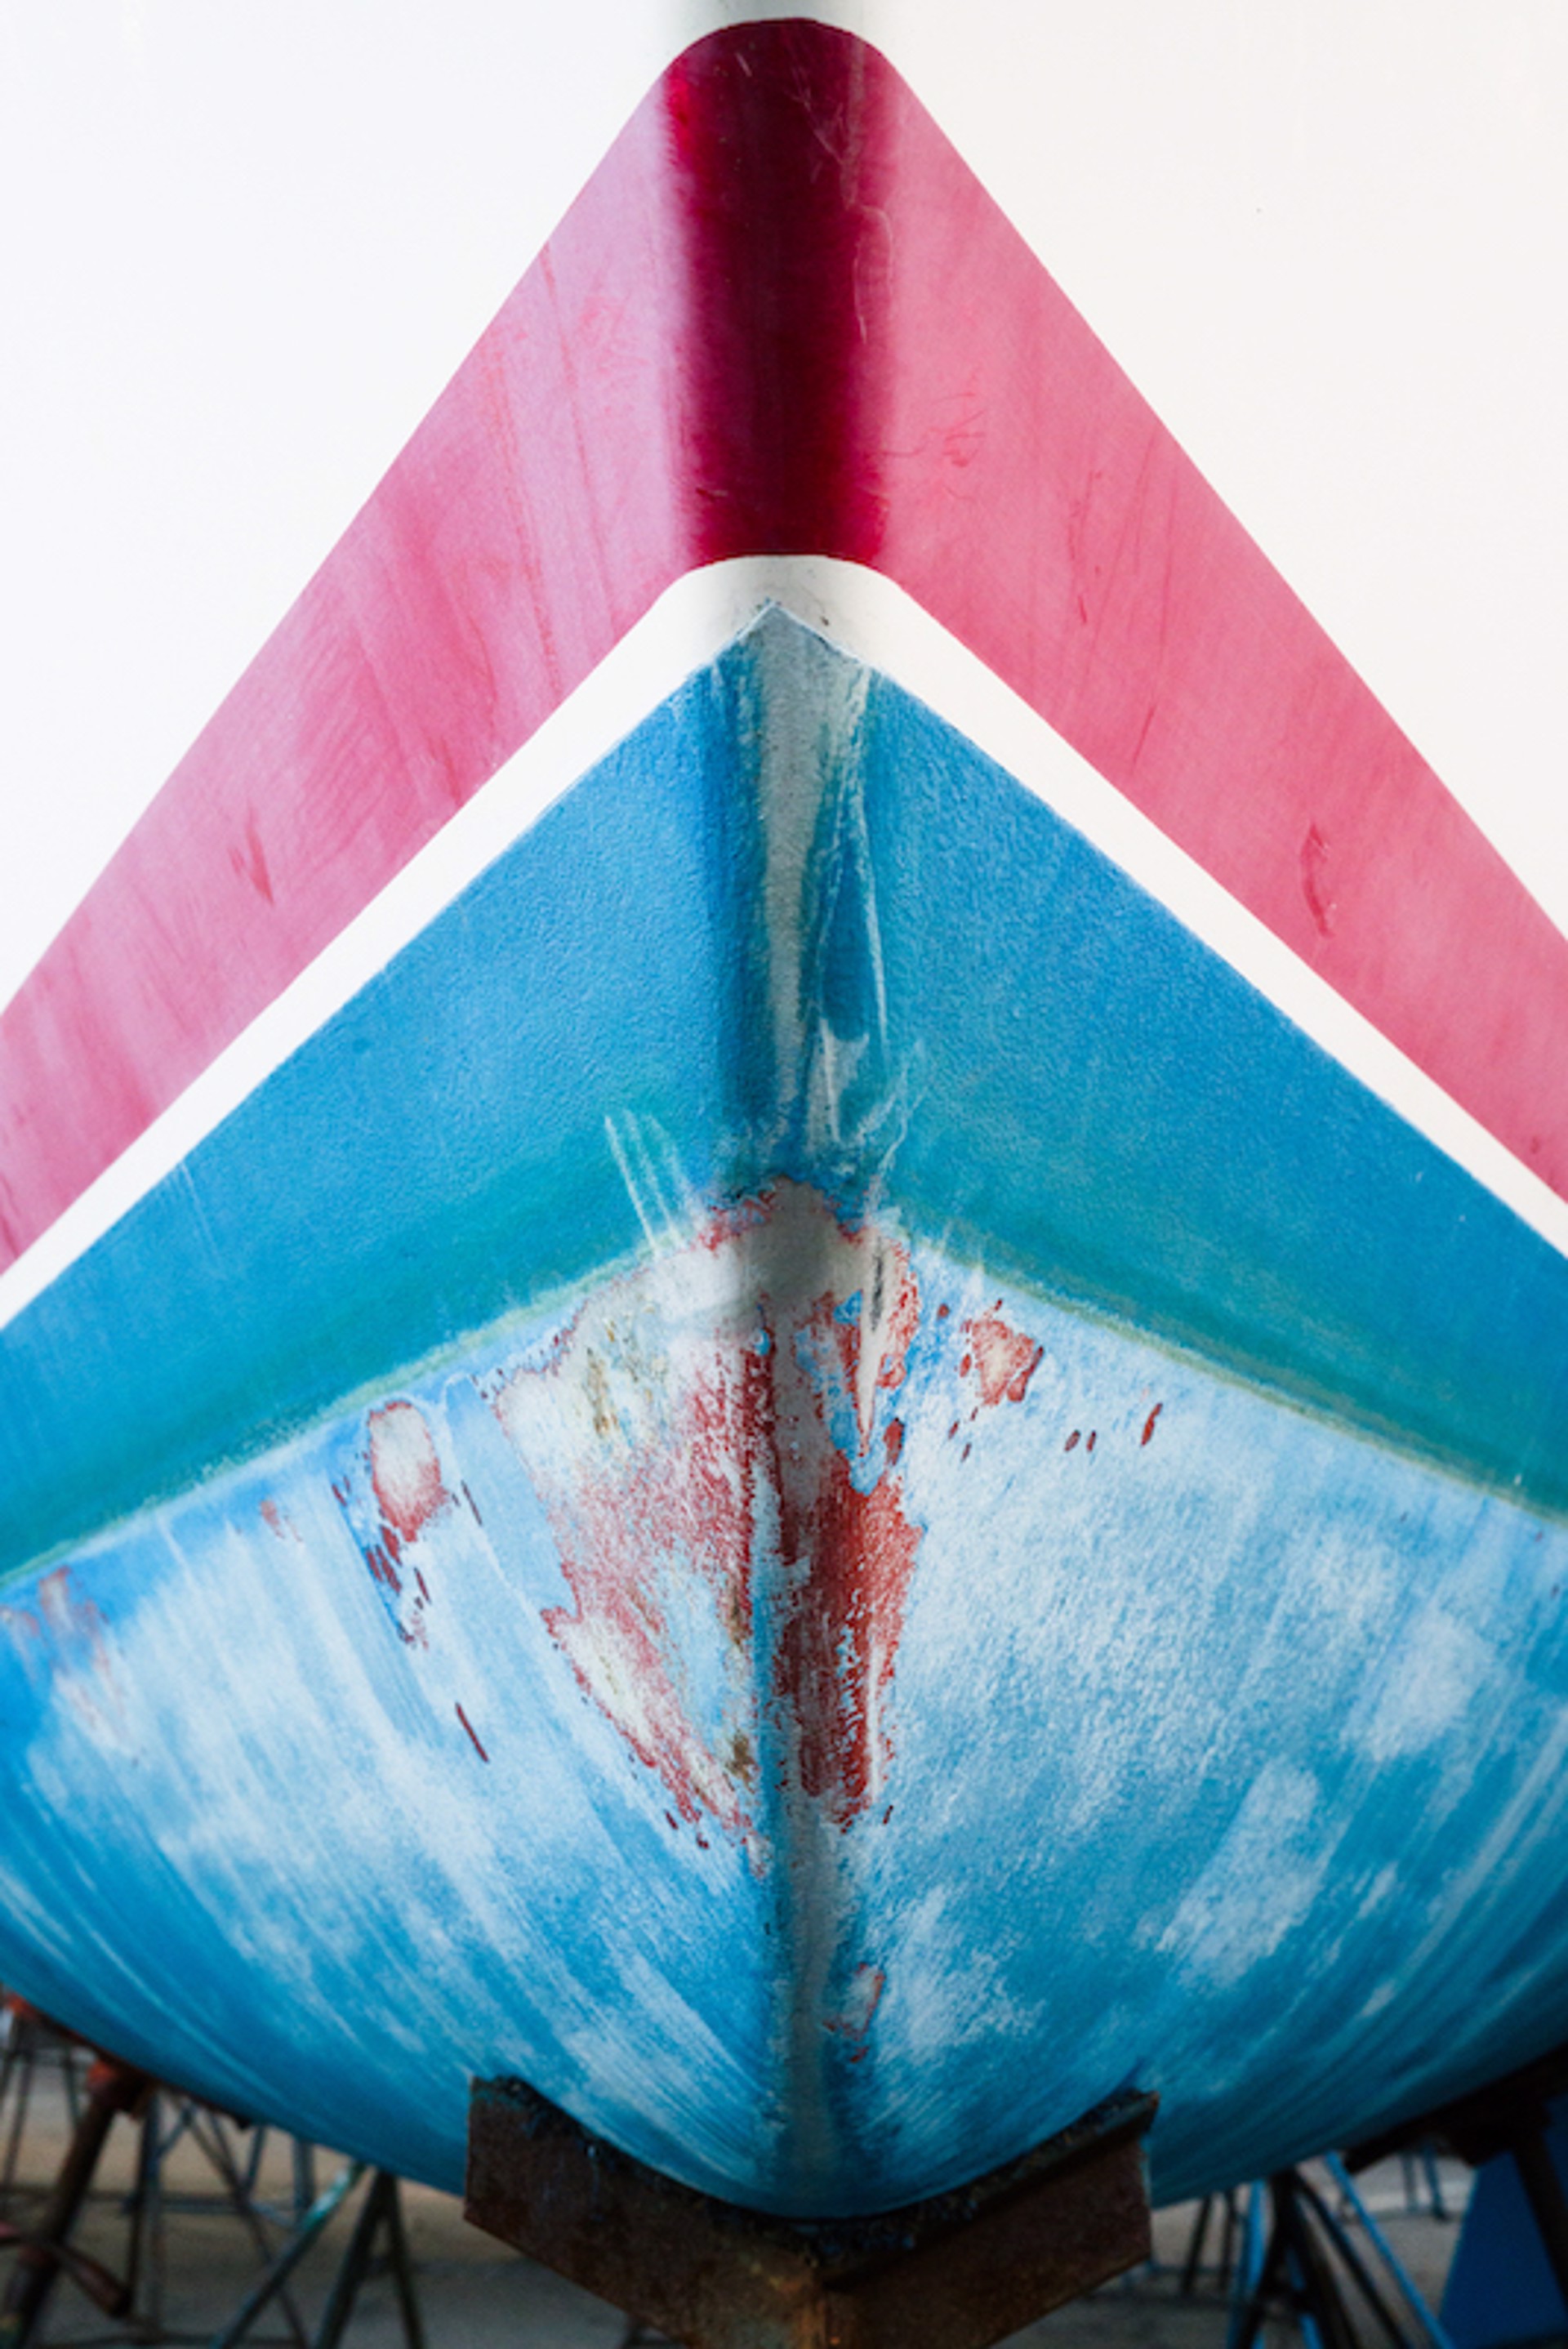 Boat Prow Series I by Peter Mendelson